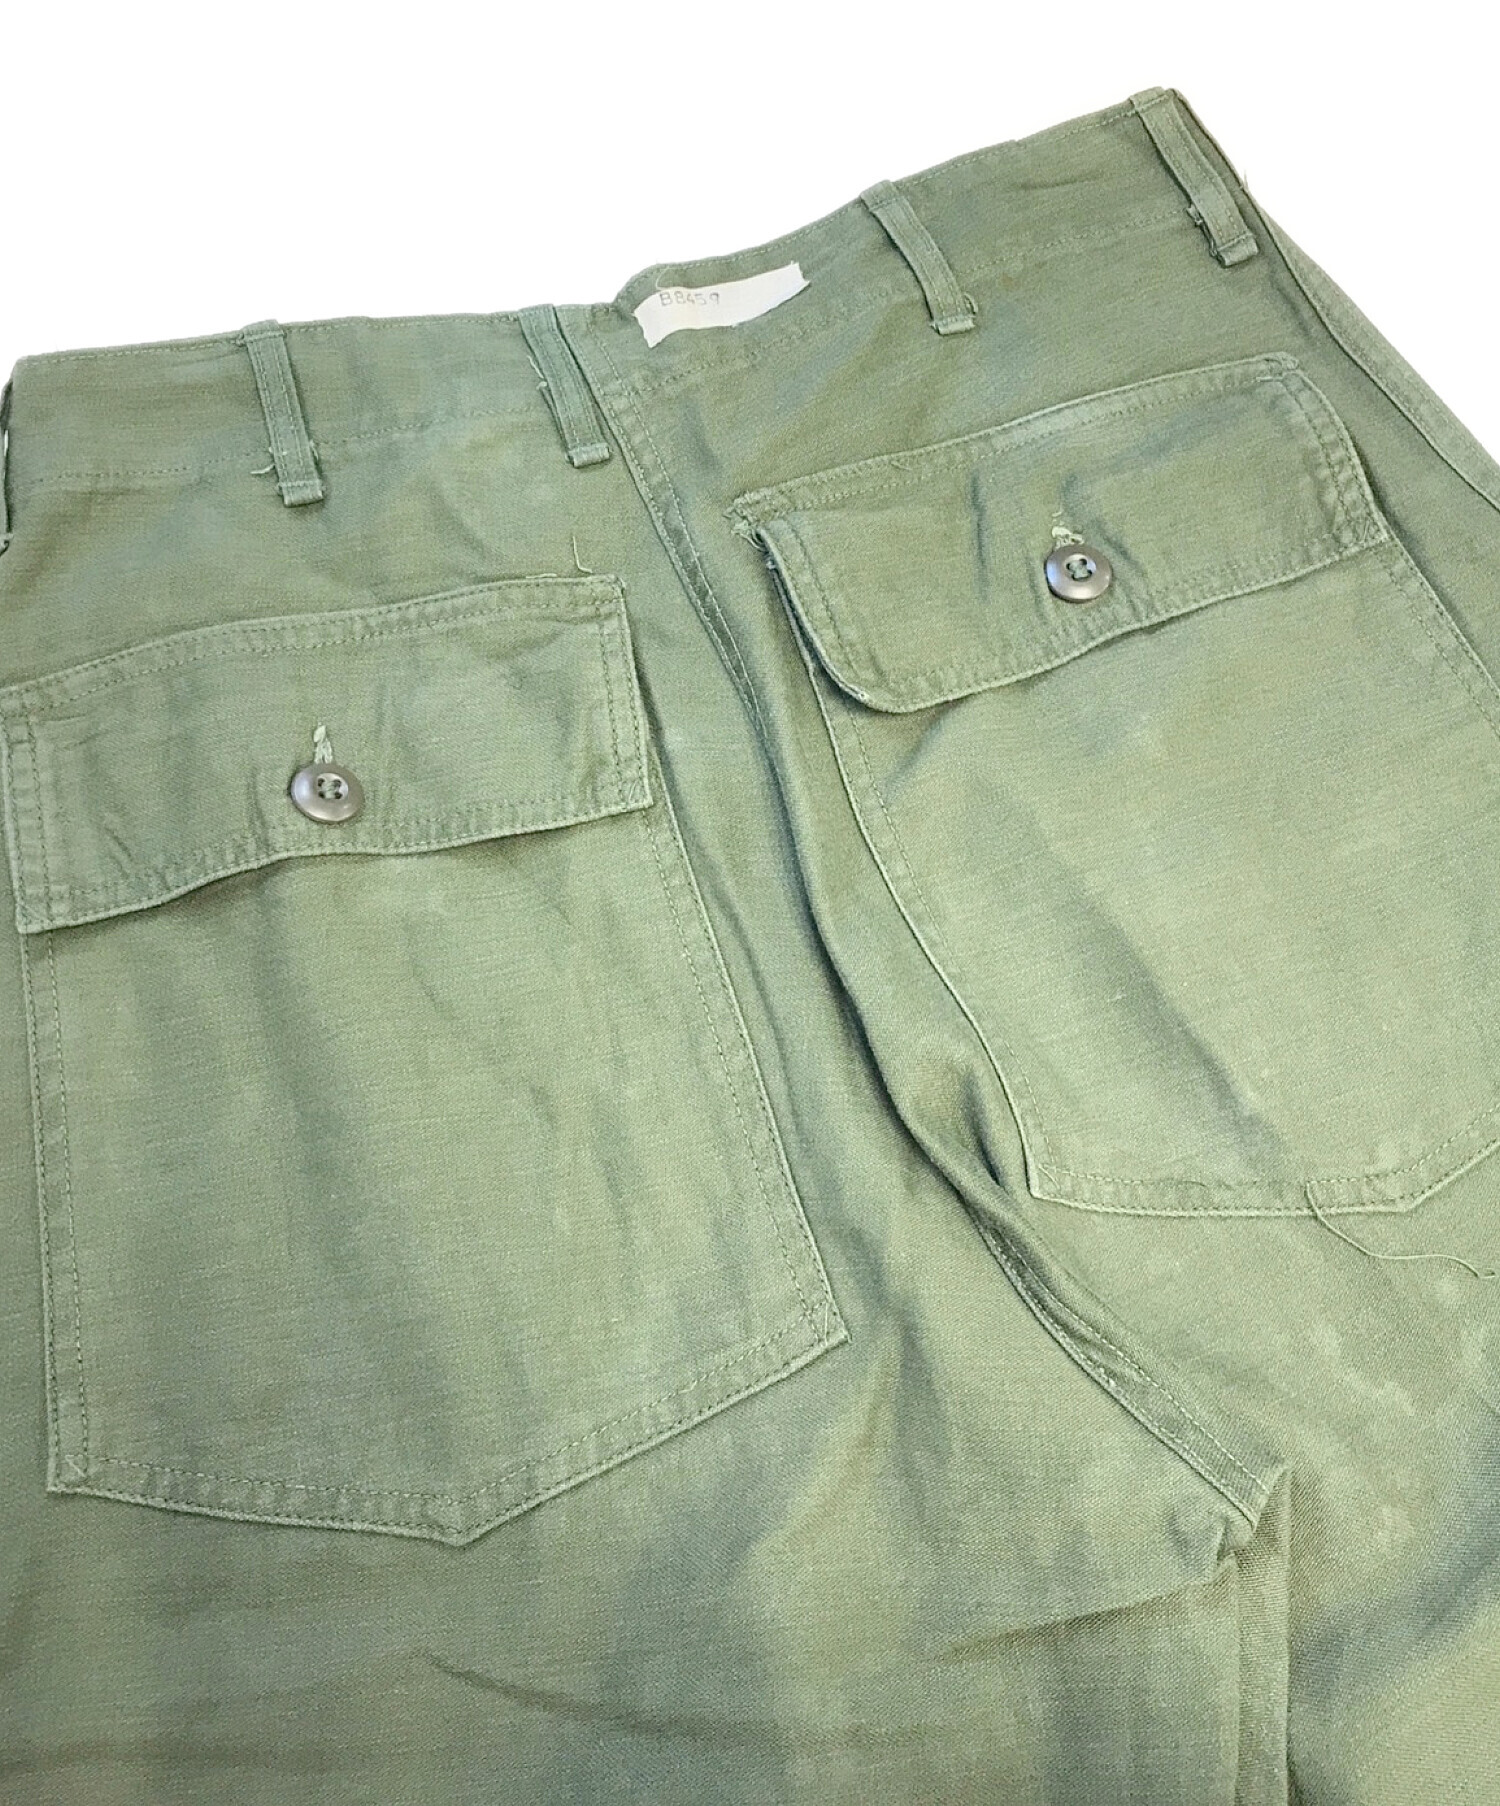 CLUCT MILITARY ANKLE PANTS 32 ベイカーパンツ